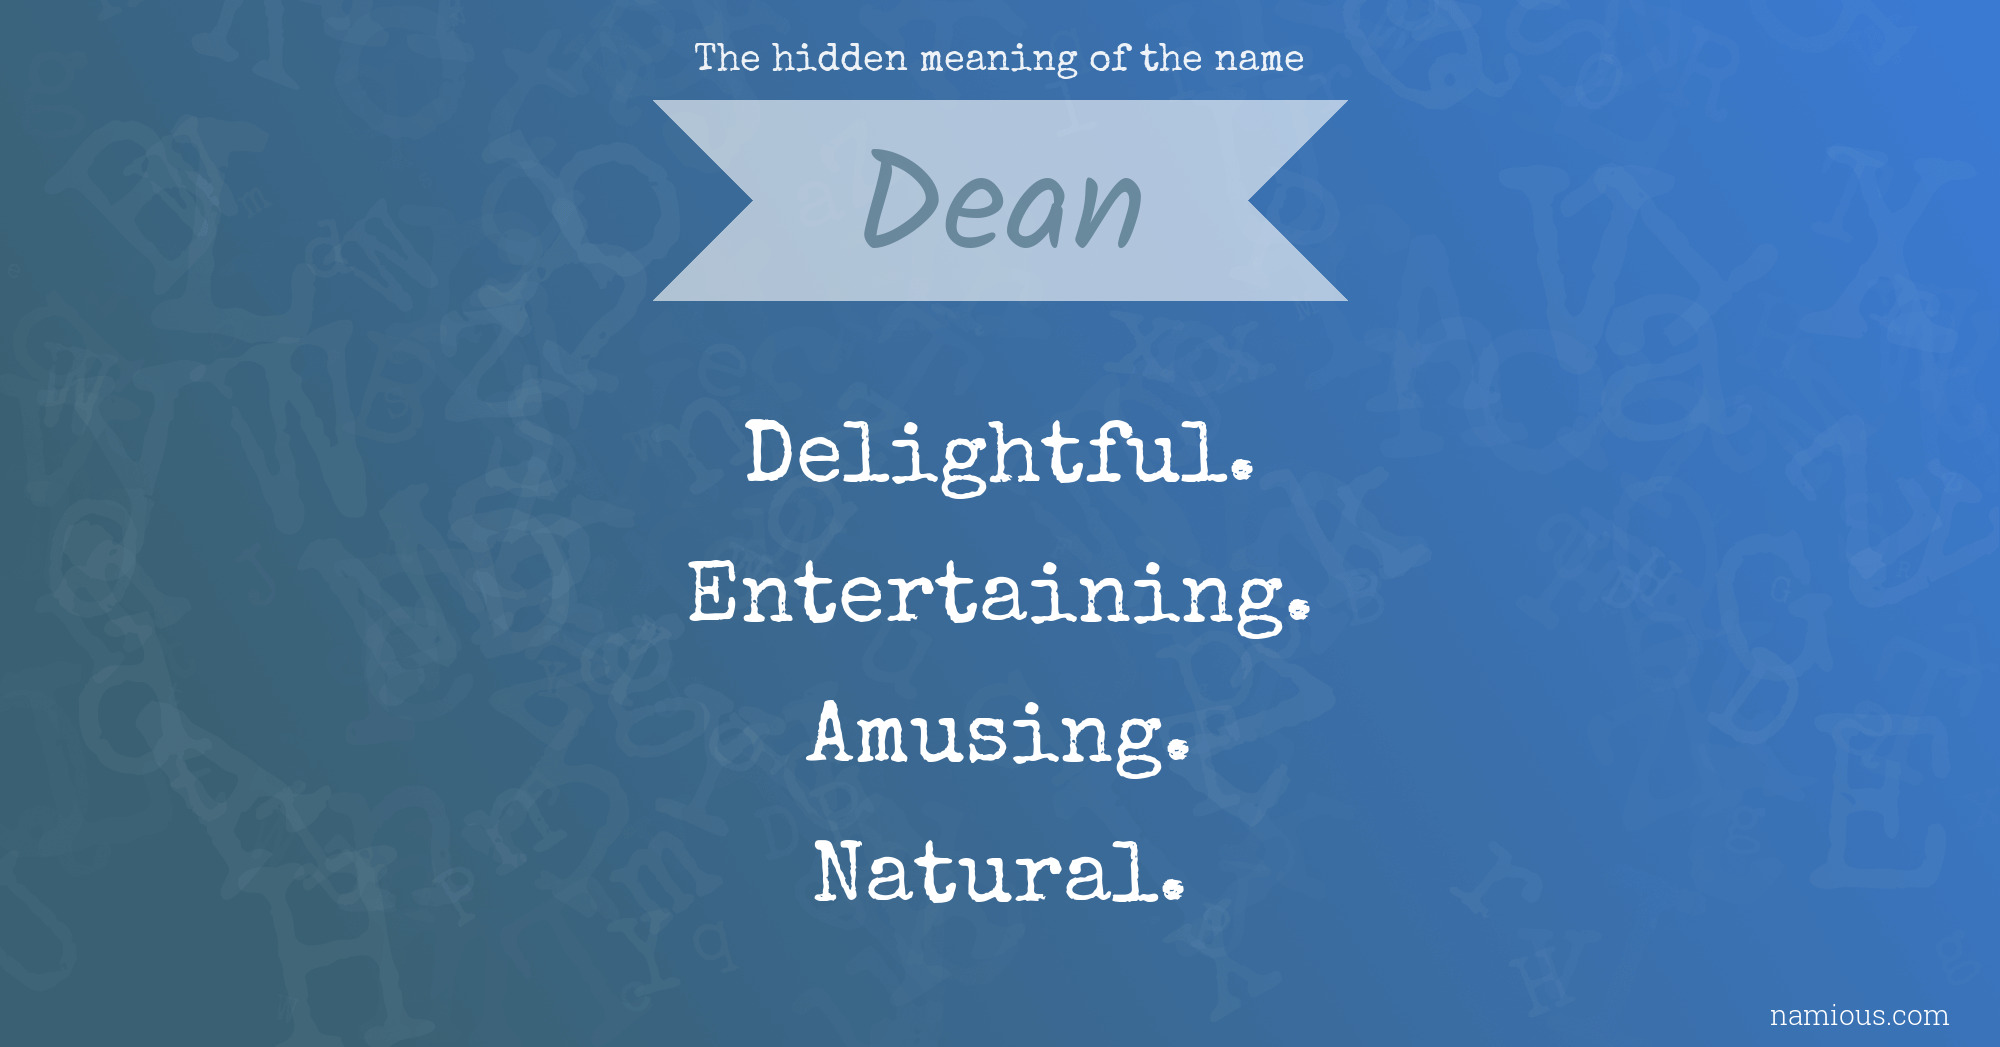 The hidden meaning of the name Dean